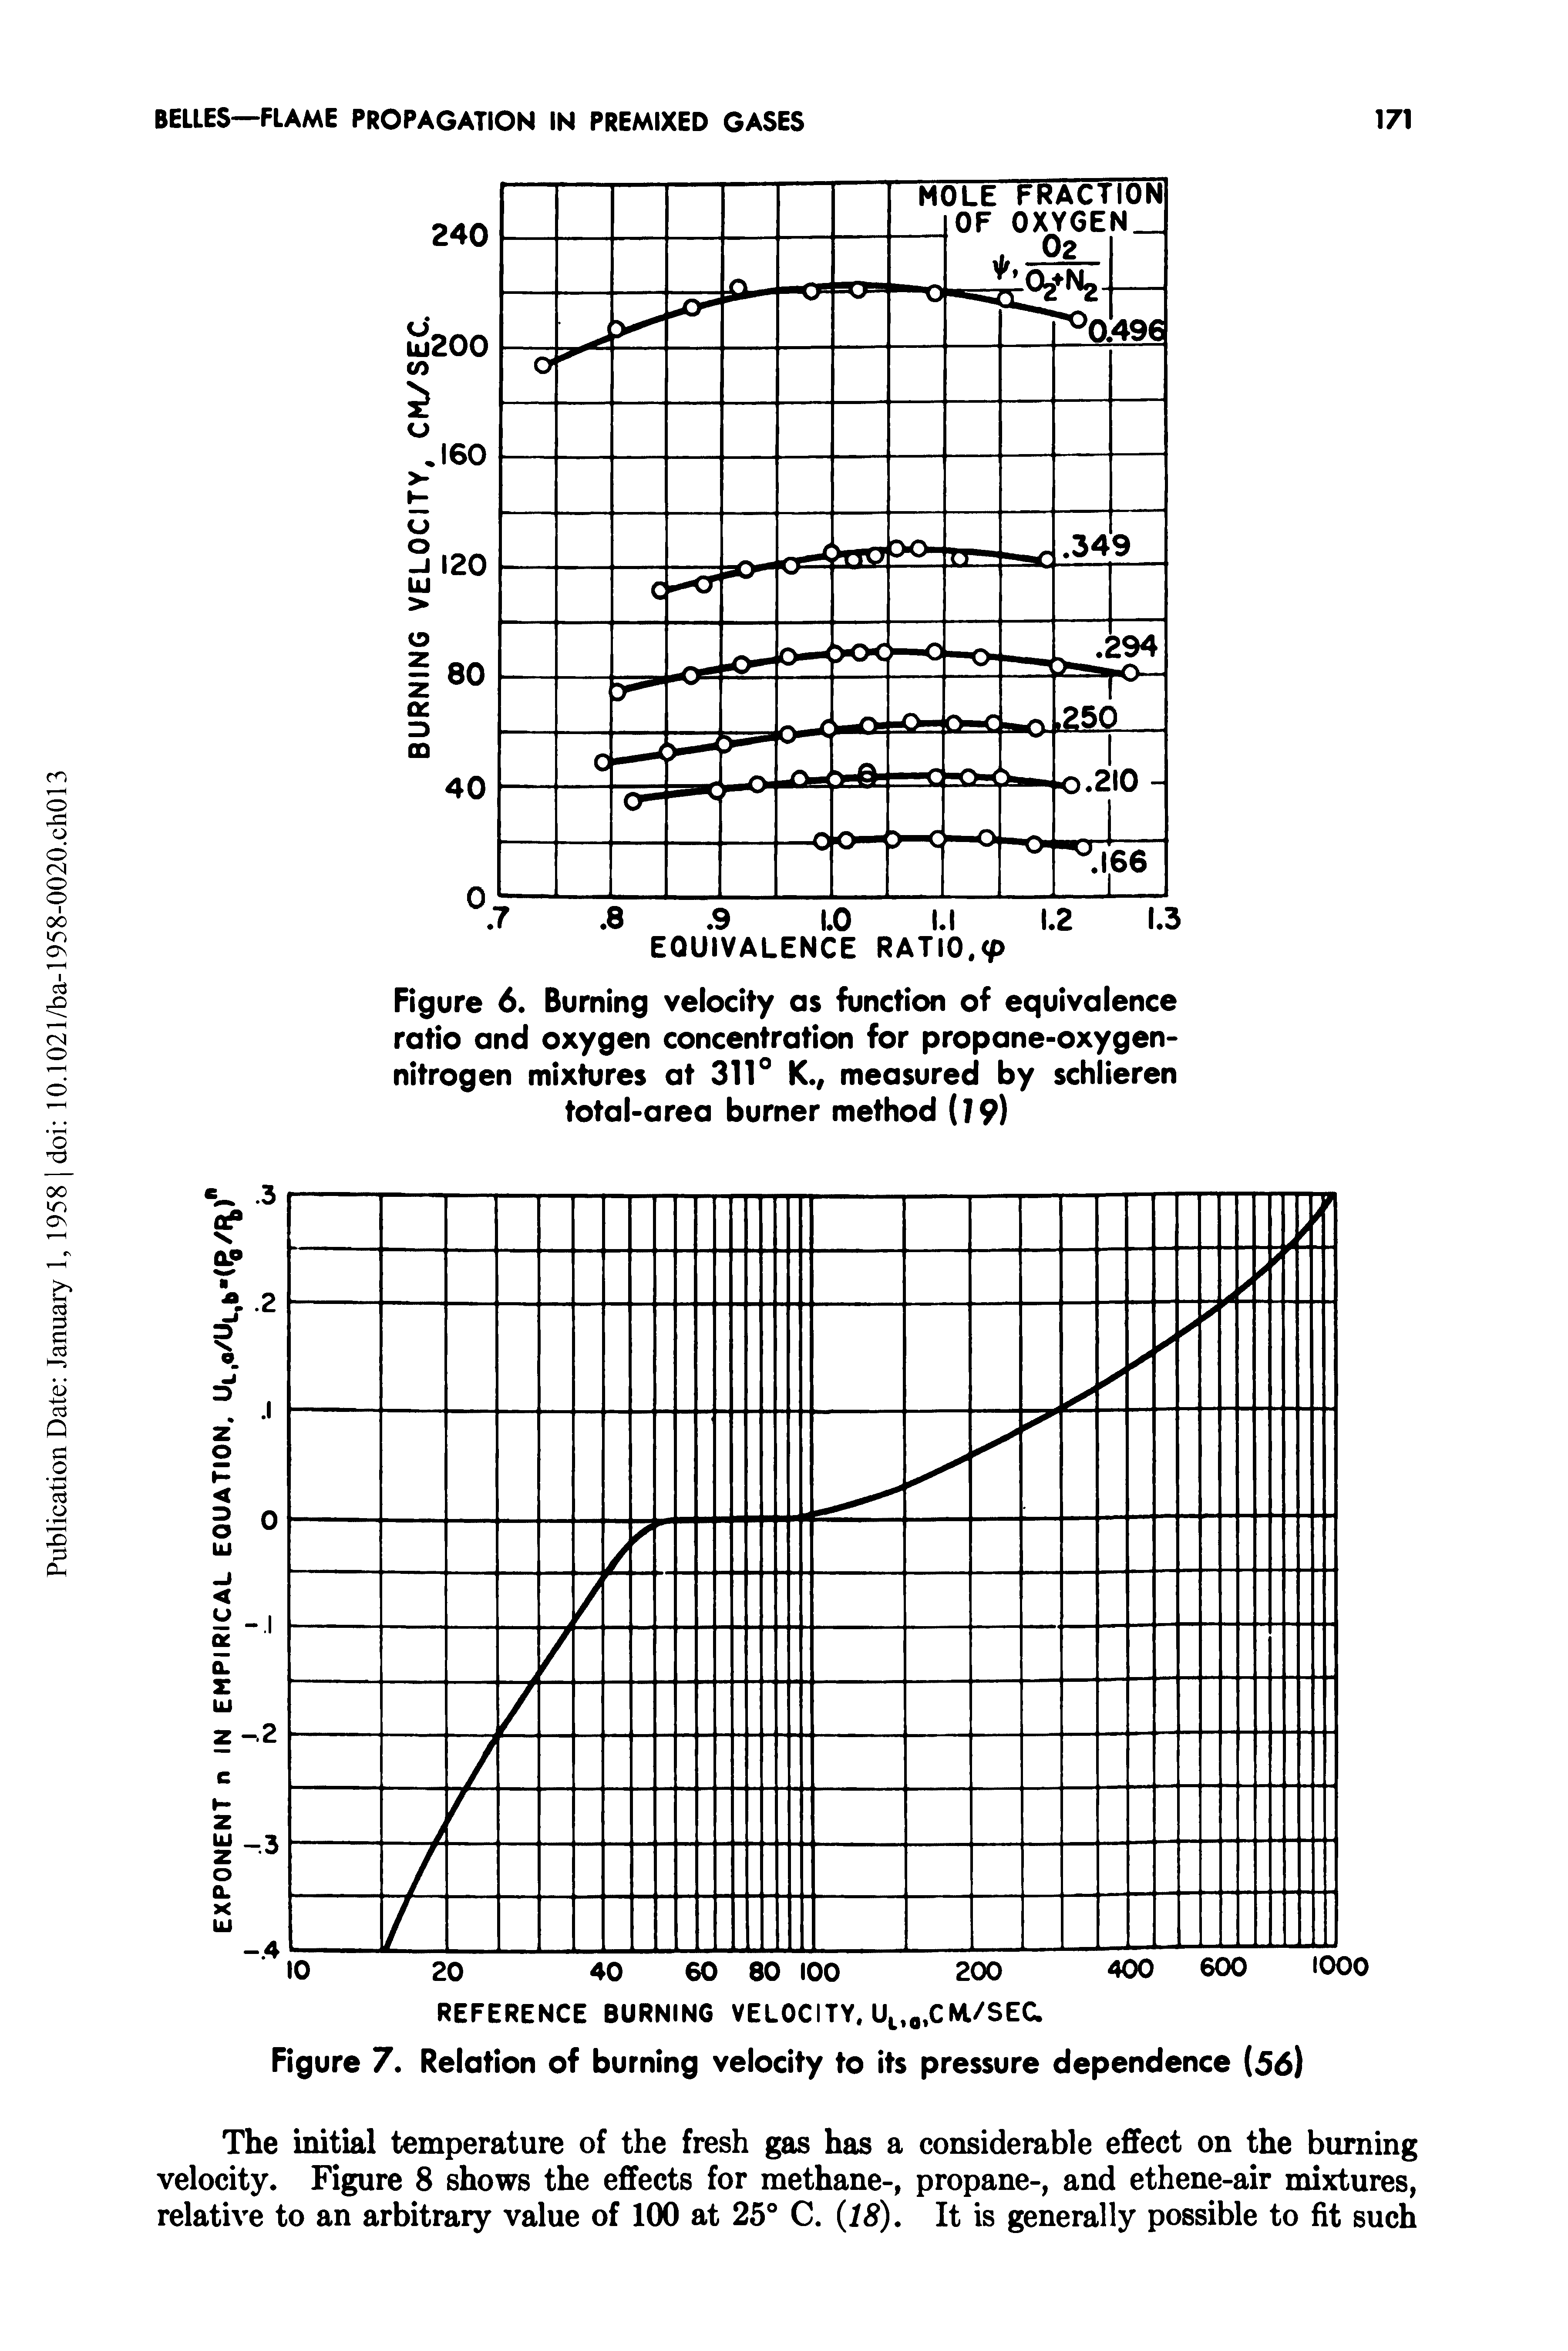 Figure 6. Burning velocity as function of equivalence ratio and oxygen concentration for propane-oxygen-nitrogen mixtures at 311° K., measured by schlieren total-area burner method (79)...